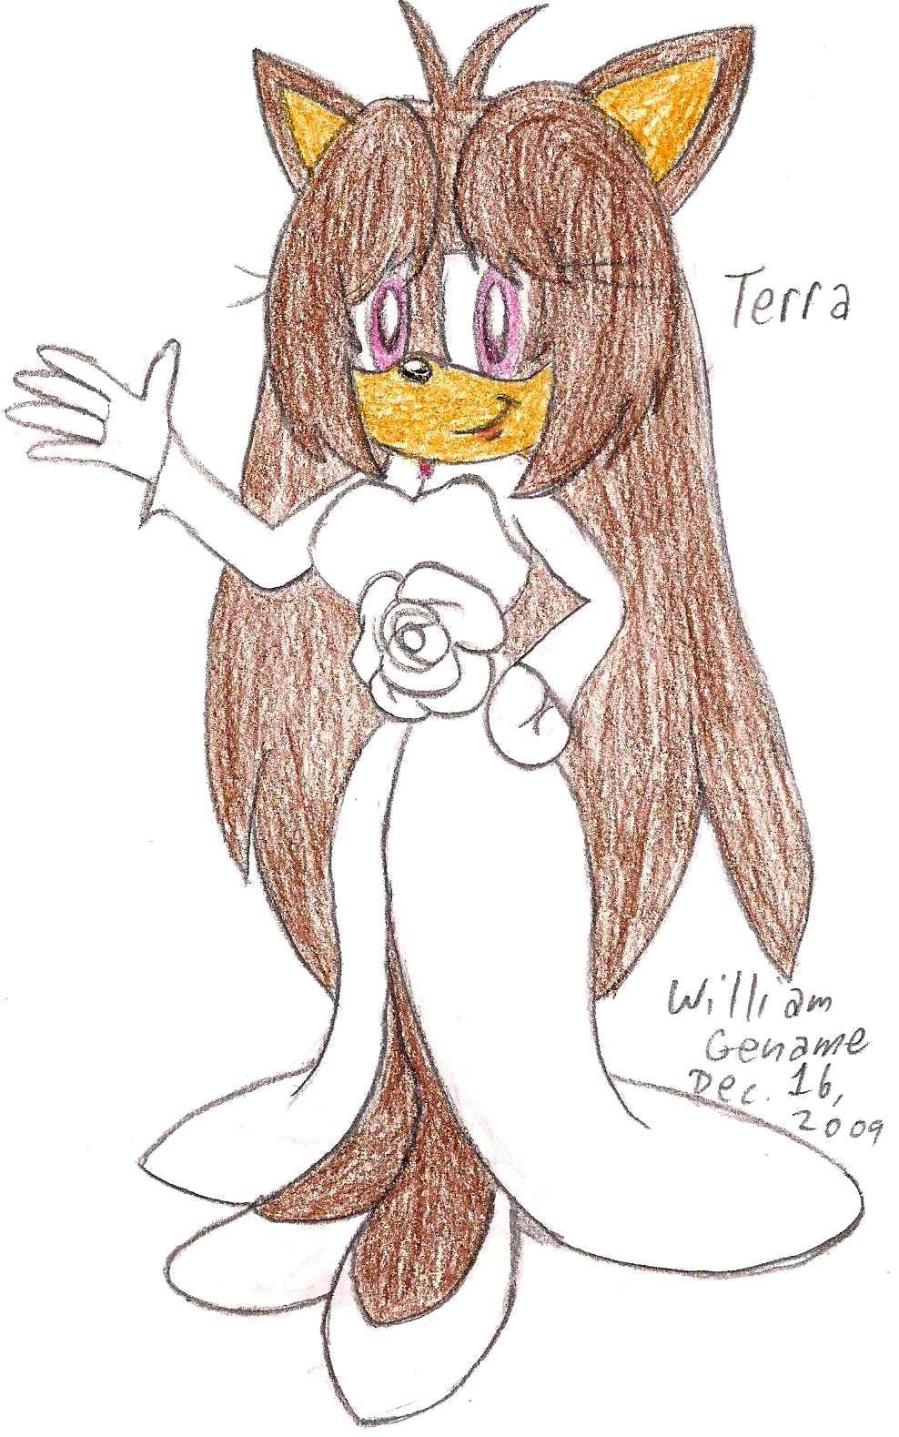 Terra's White Amy Dress by germanname